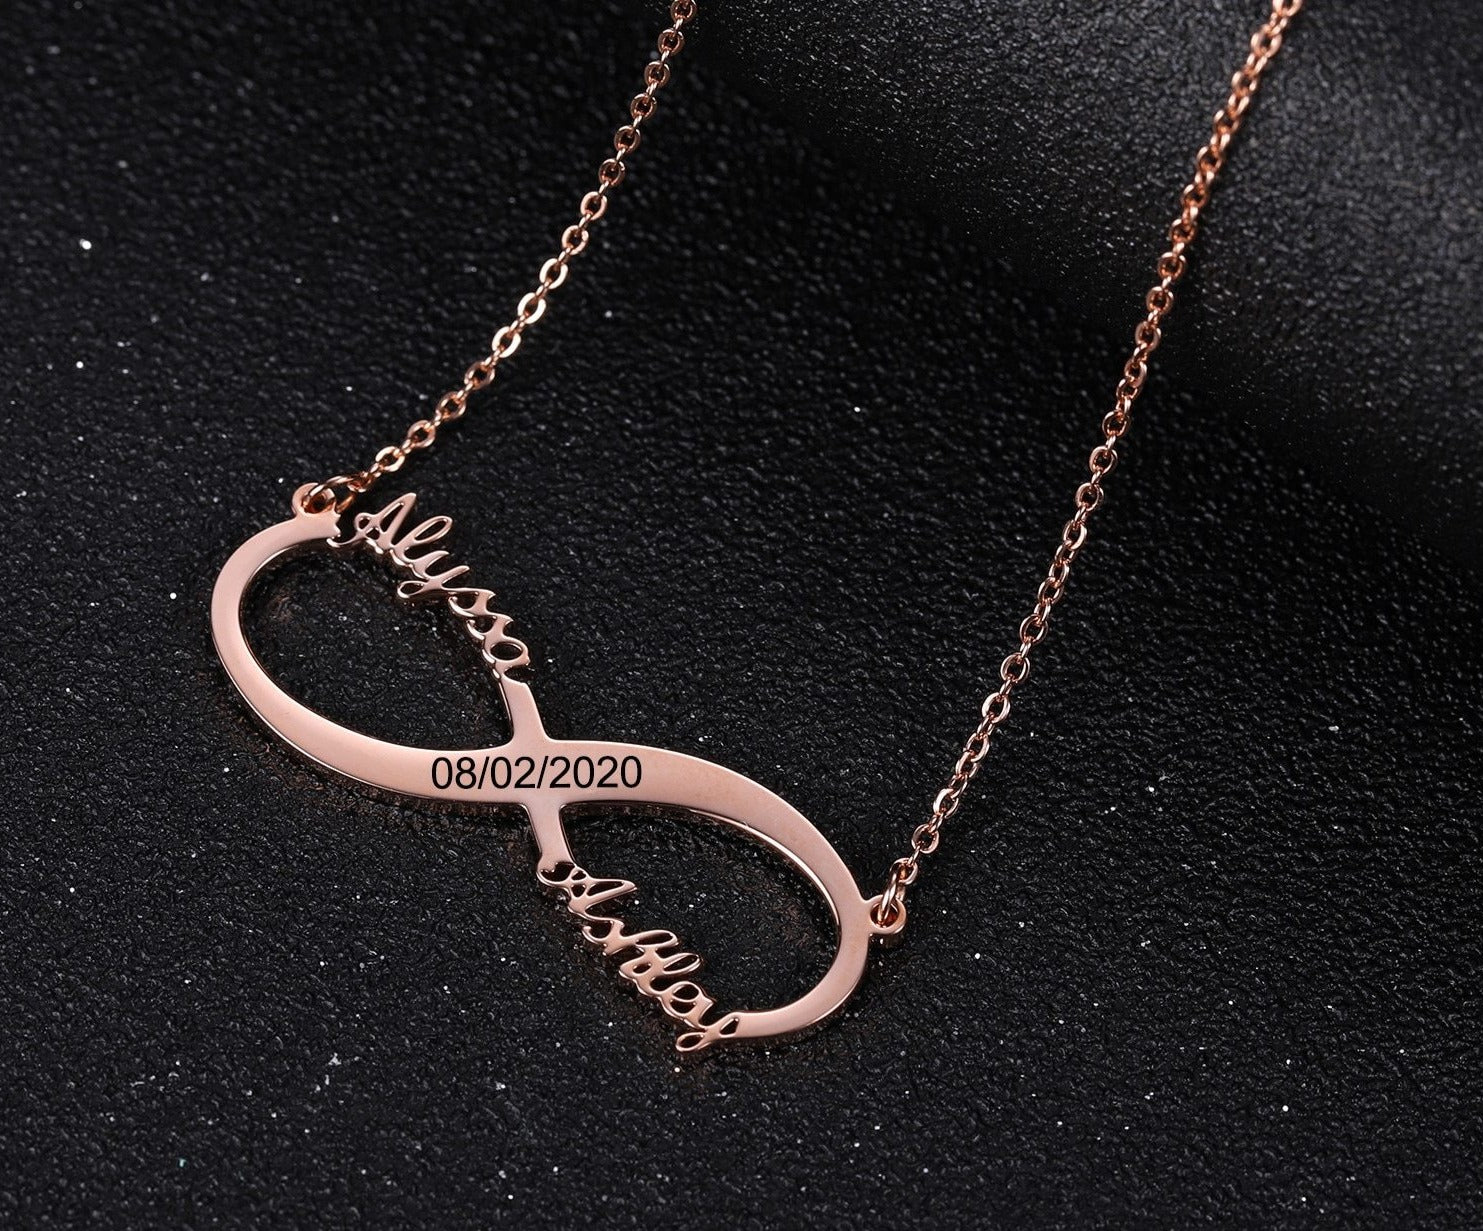 Personalized Date Infinity Necklace